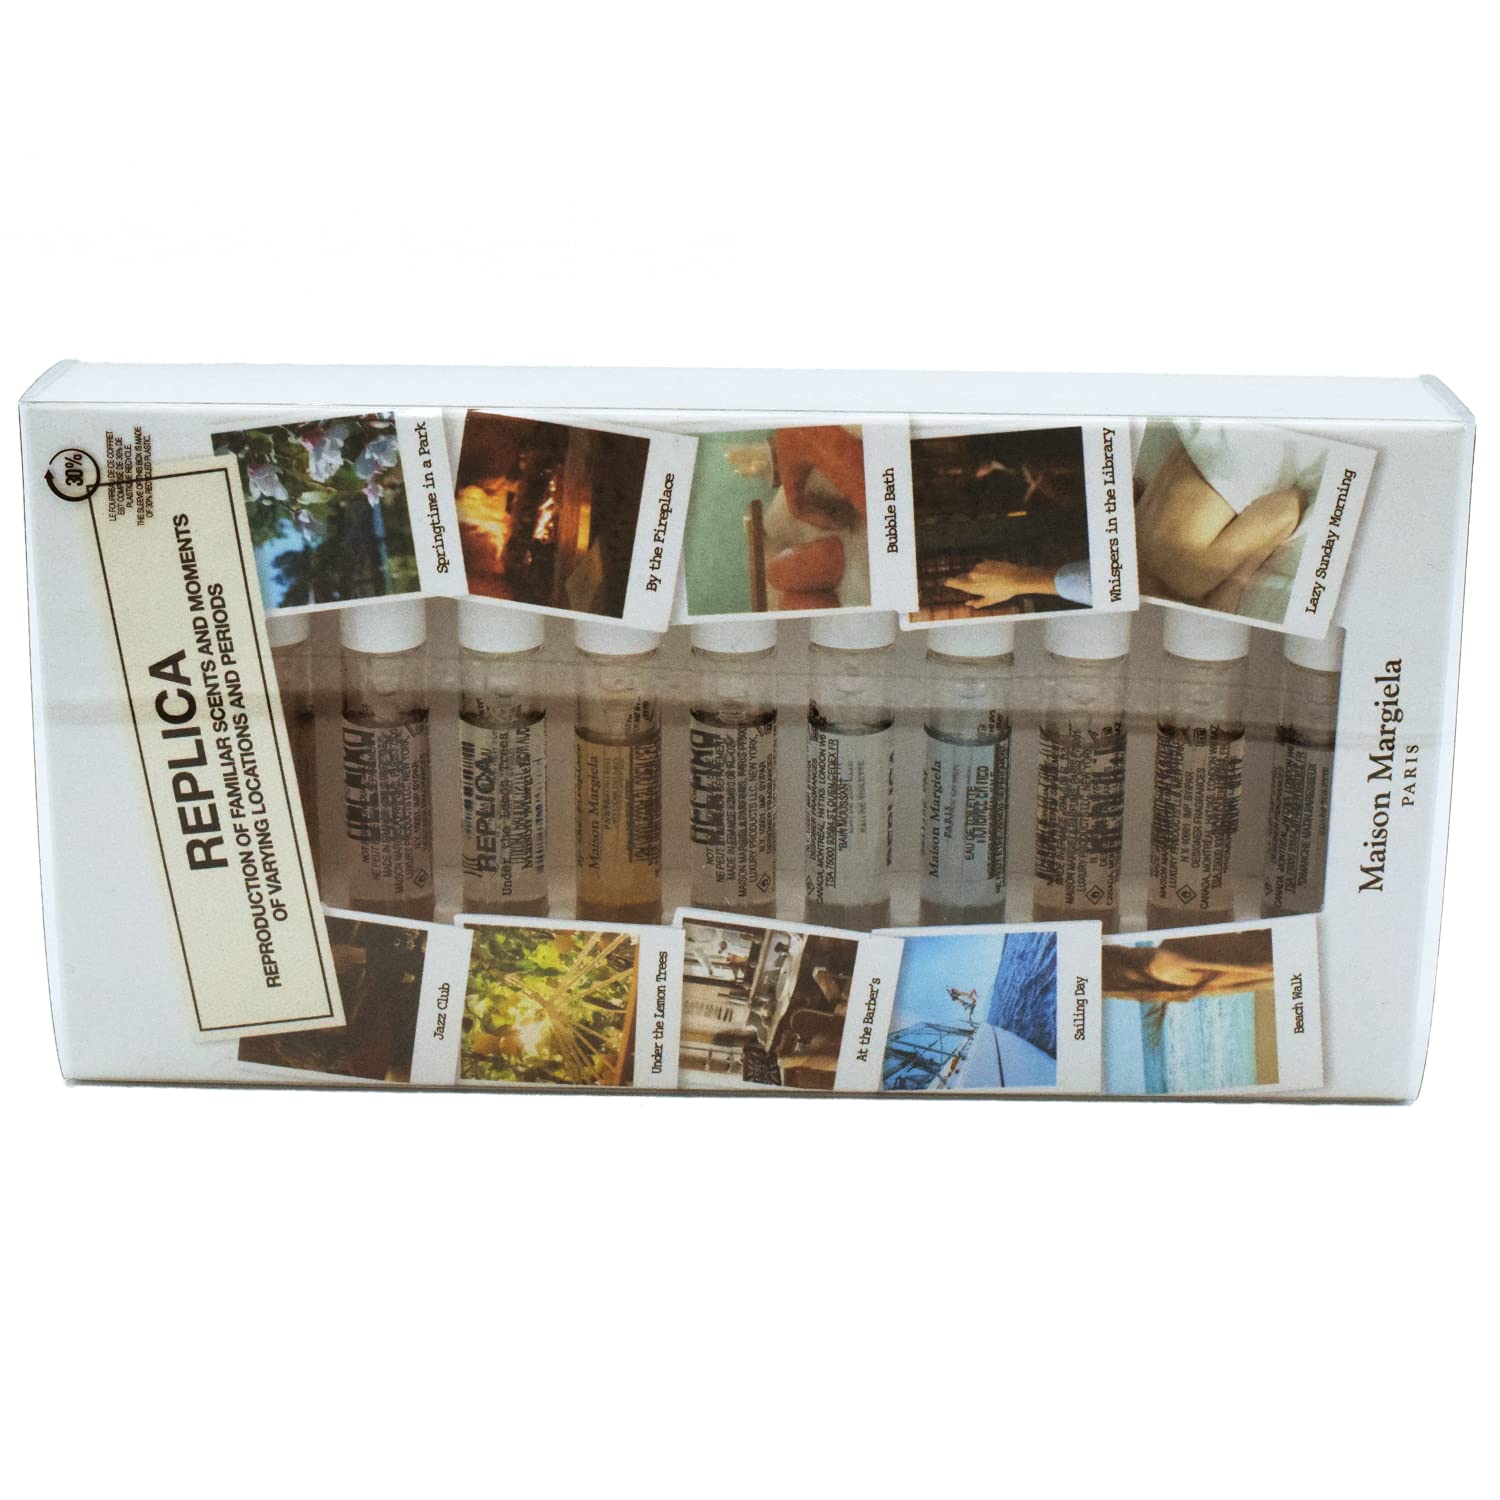 Maison Margiela Replica Memory Discovery 10 Vial Parfum Sampler Set - By The Fireplace, Jazz Club, Under the Lemon, Whispers In Library, Bubble Bath, Lazy Sunday Morning, Springtime In Park, Beach Walk, At the Barber's